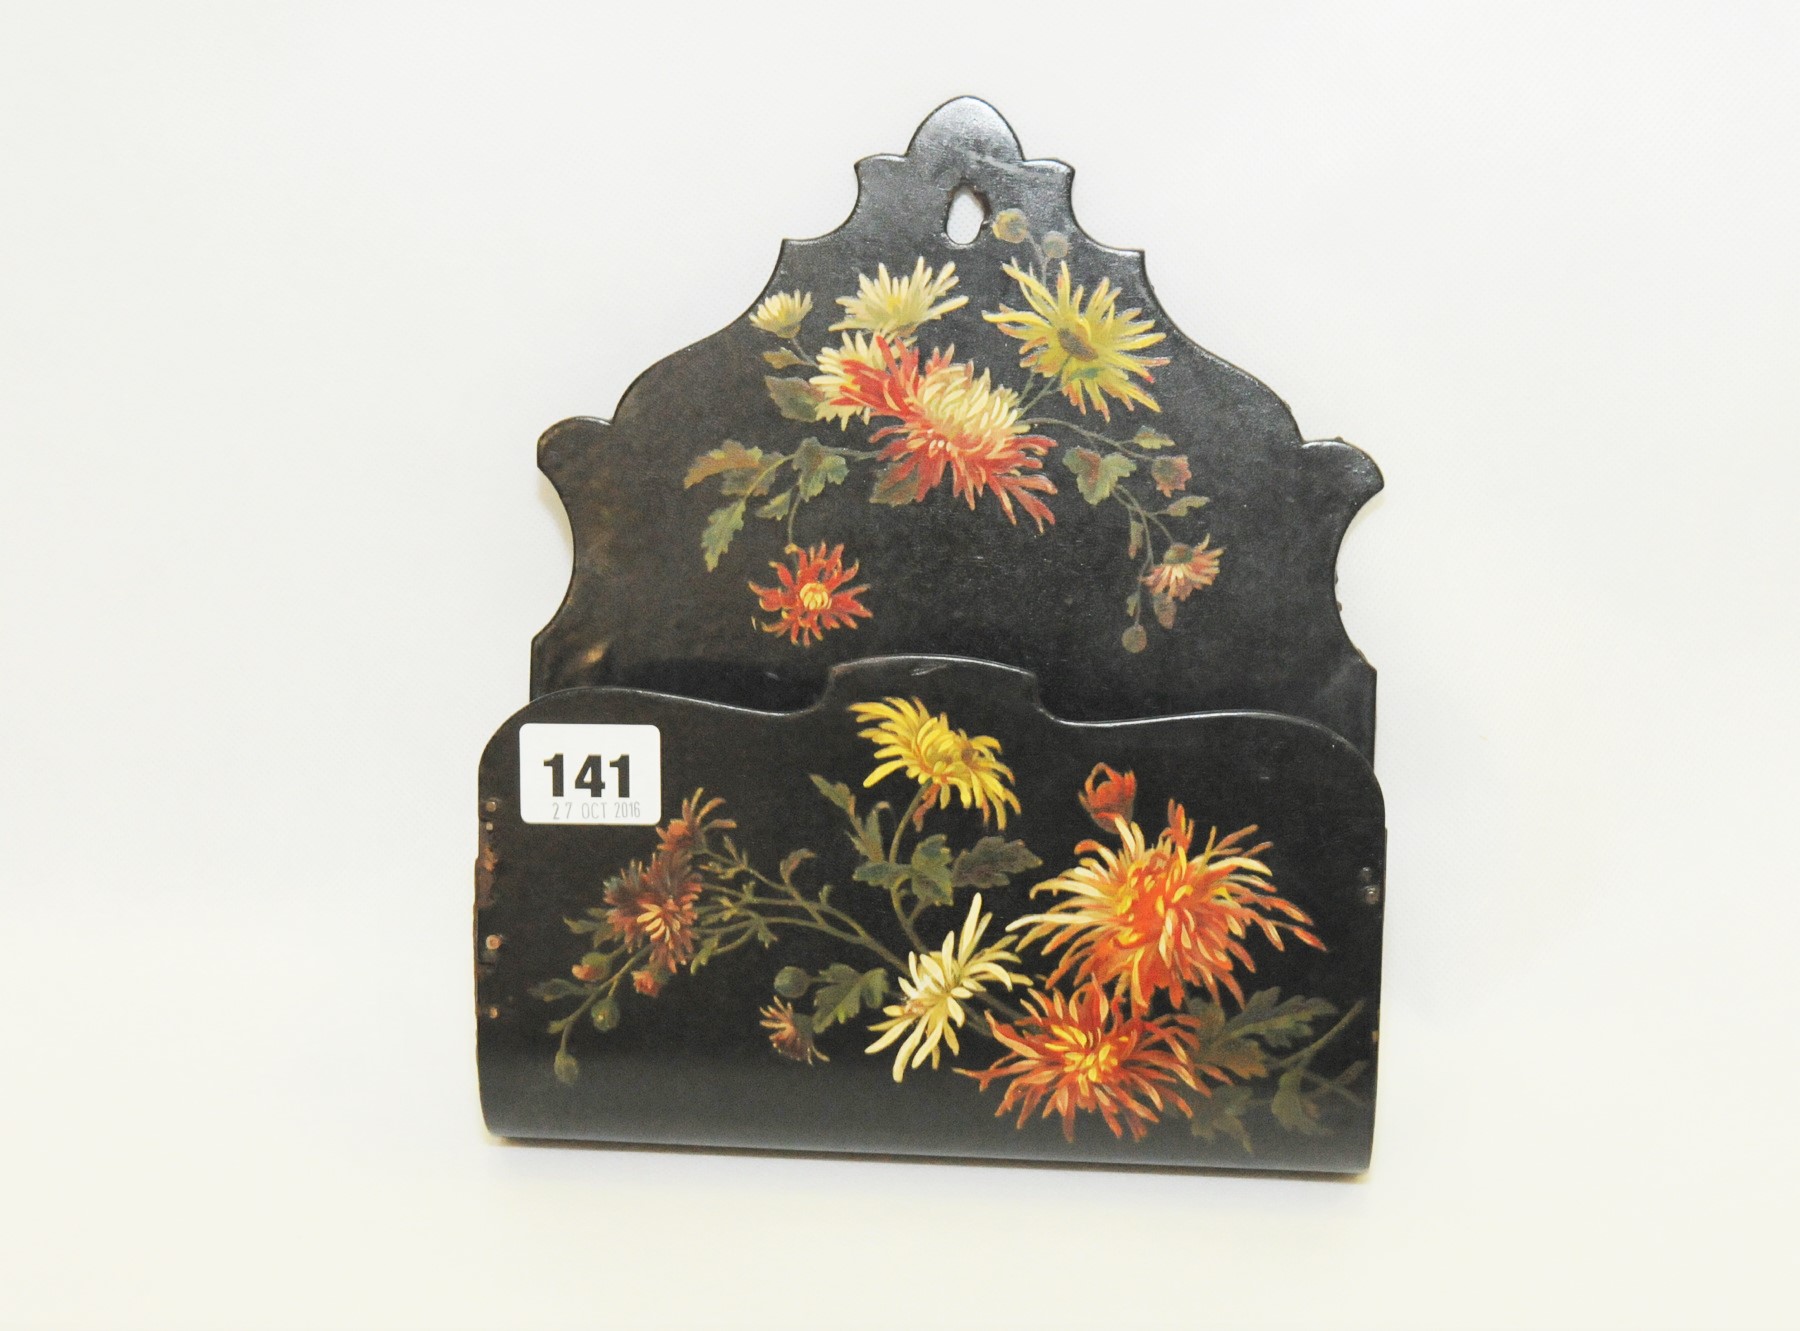 Papier mâché black lacquer wall pocket with polychrome decoration of chrysanthemums, 9½" high.